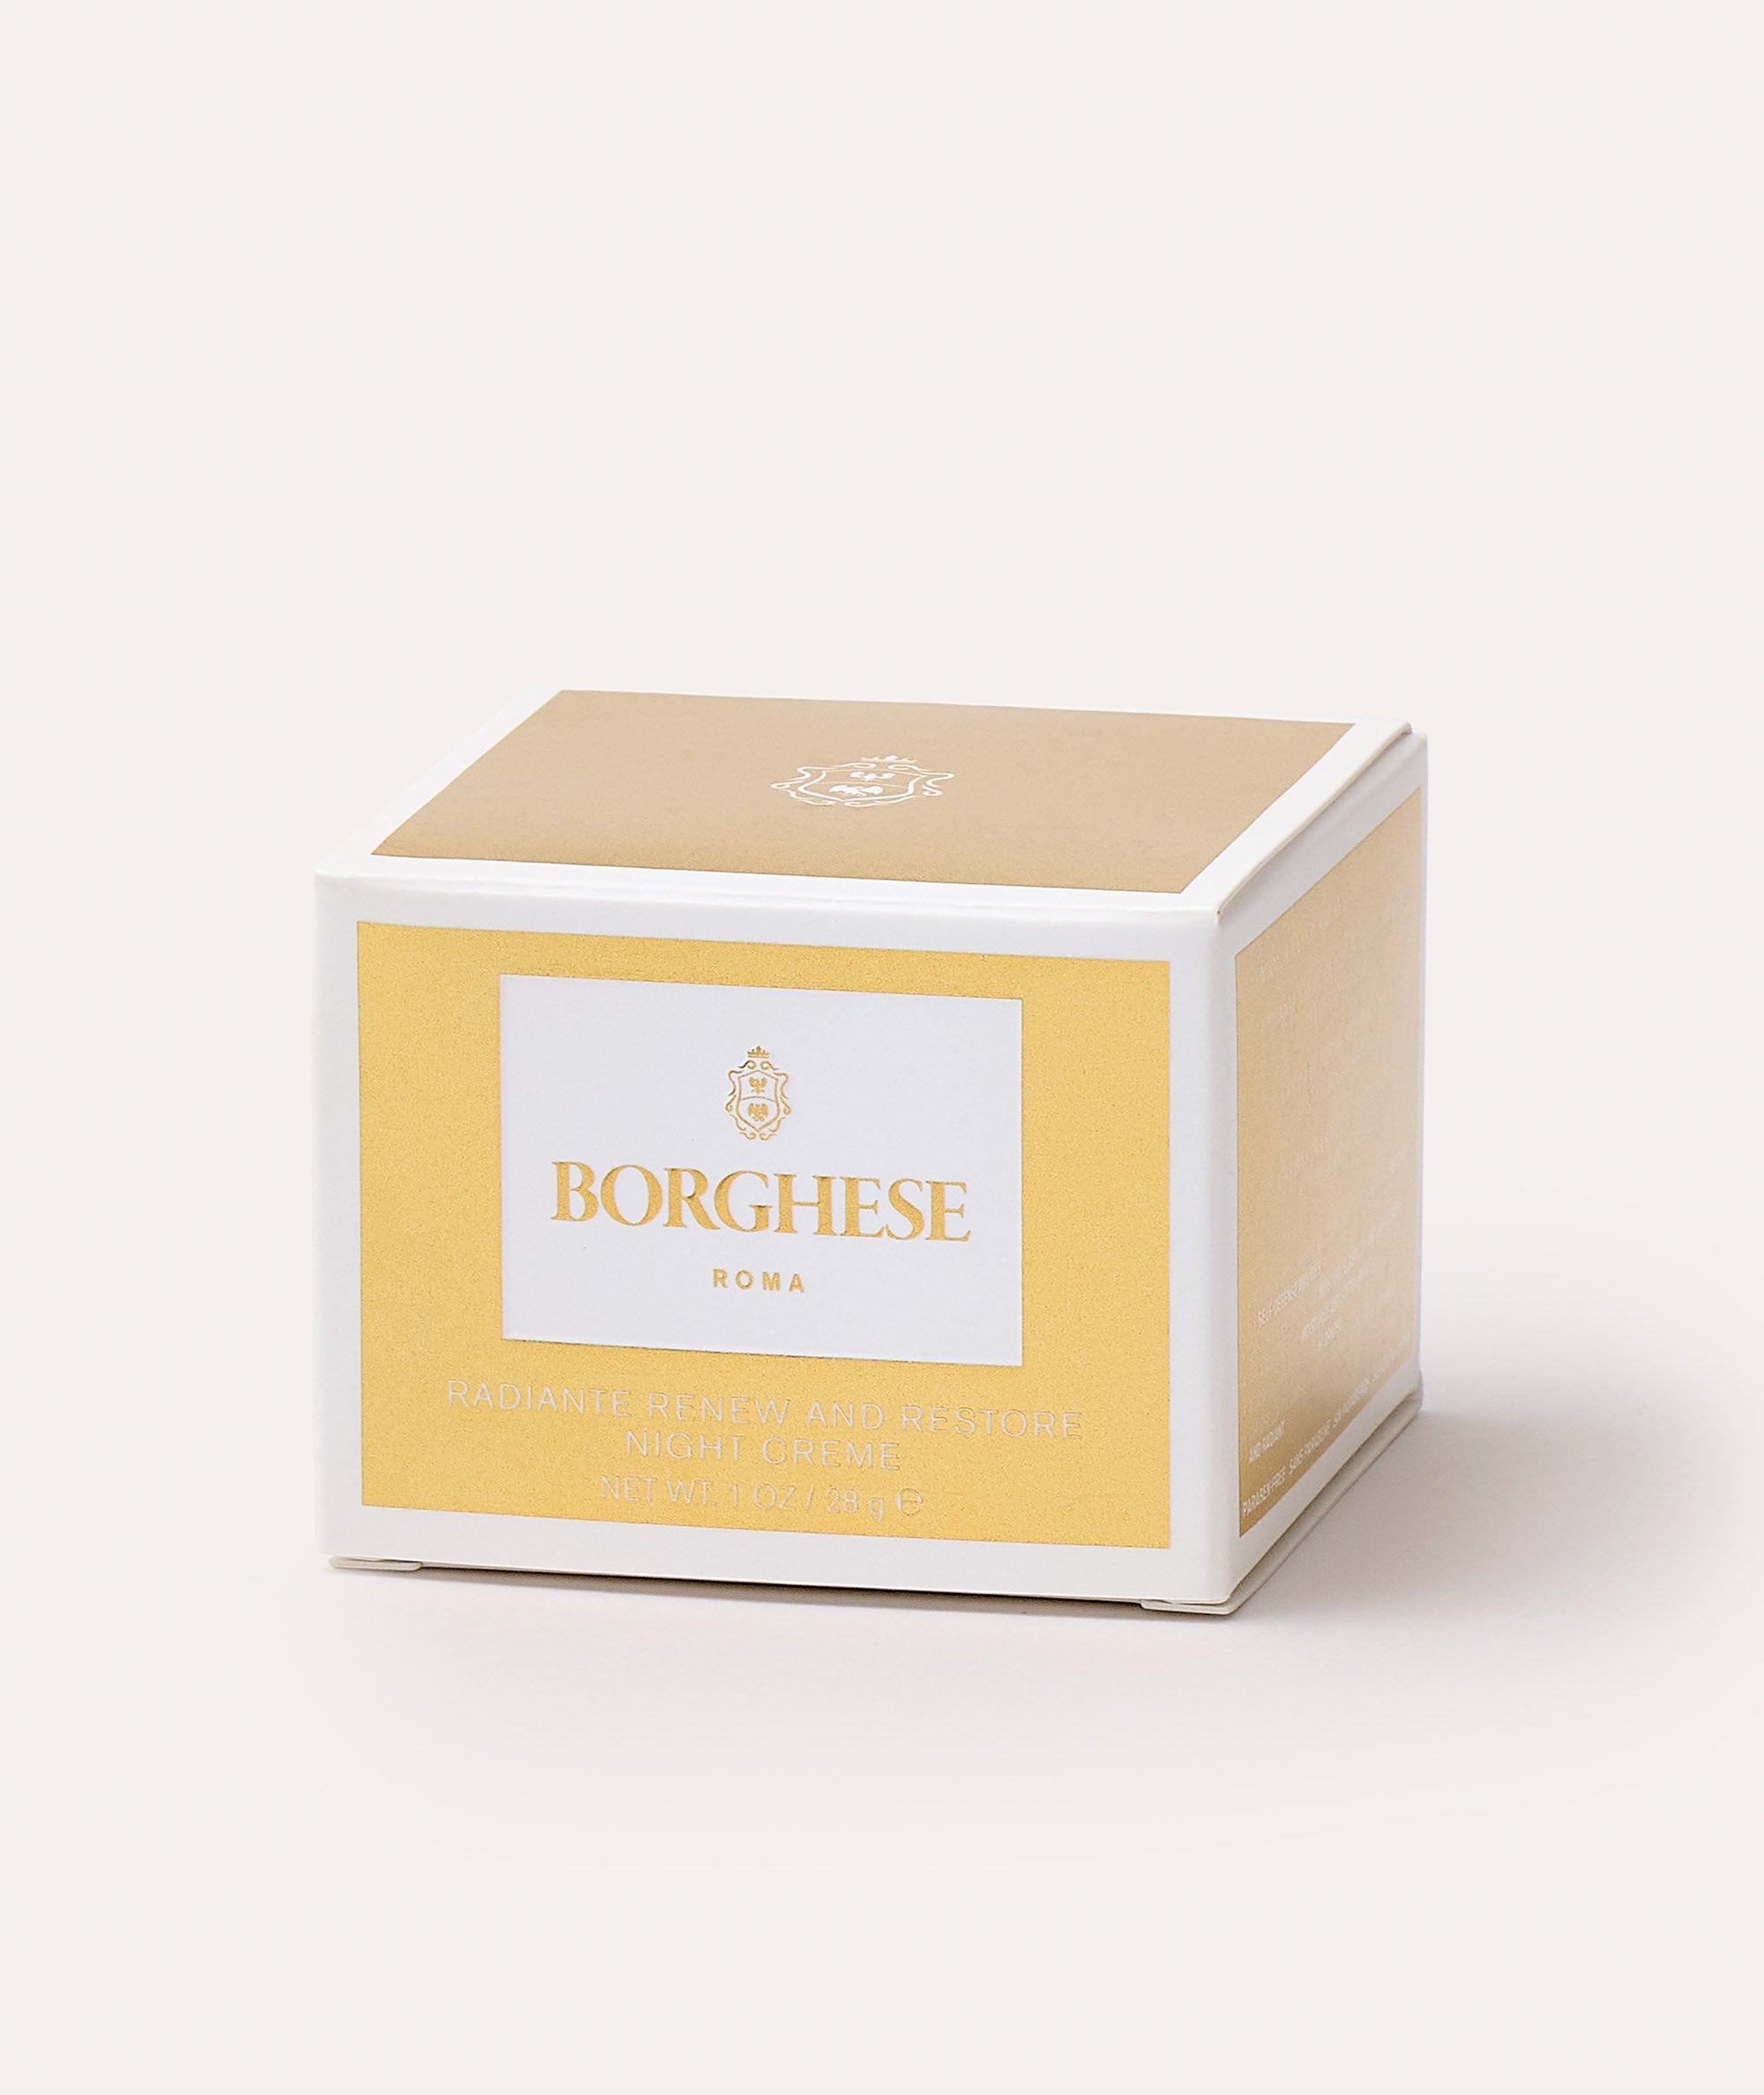 This is a picture of the Borghese Radiante Renew and Restore Night Creme in a box